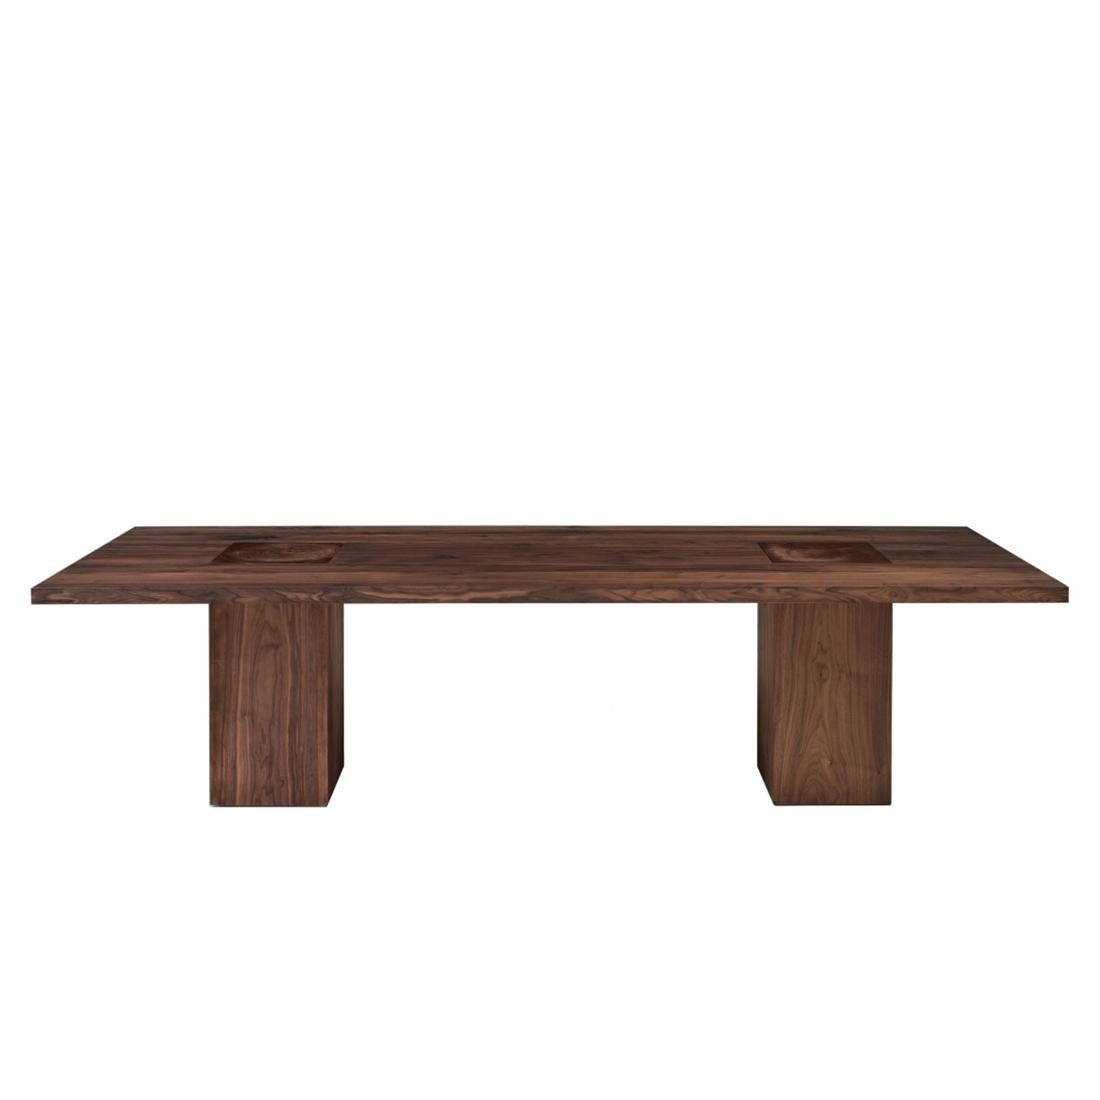 Italian Full Wood Dining Table For Sale